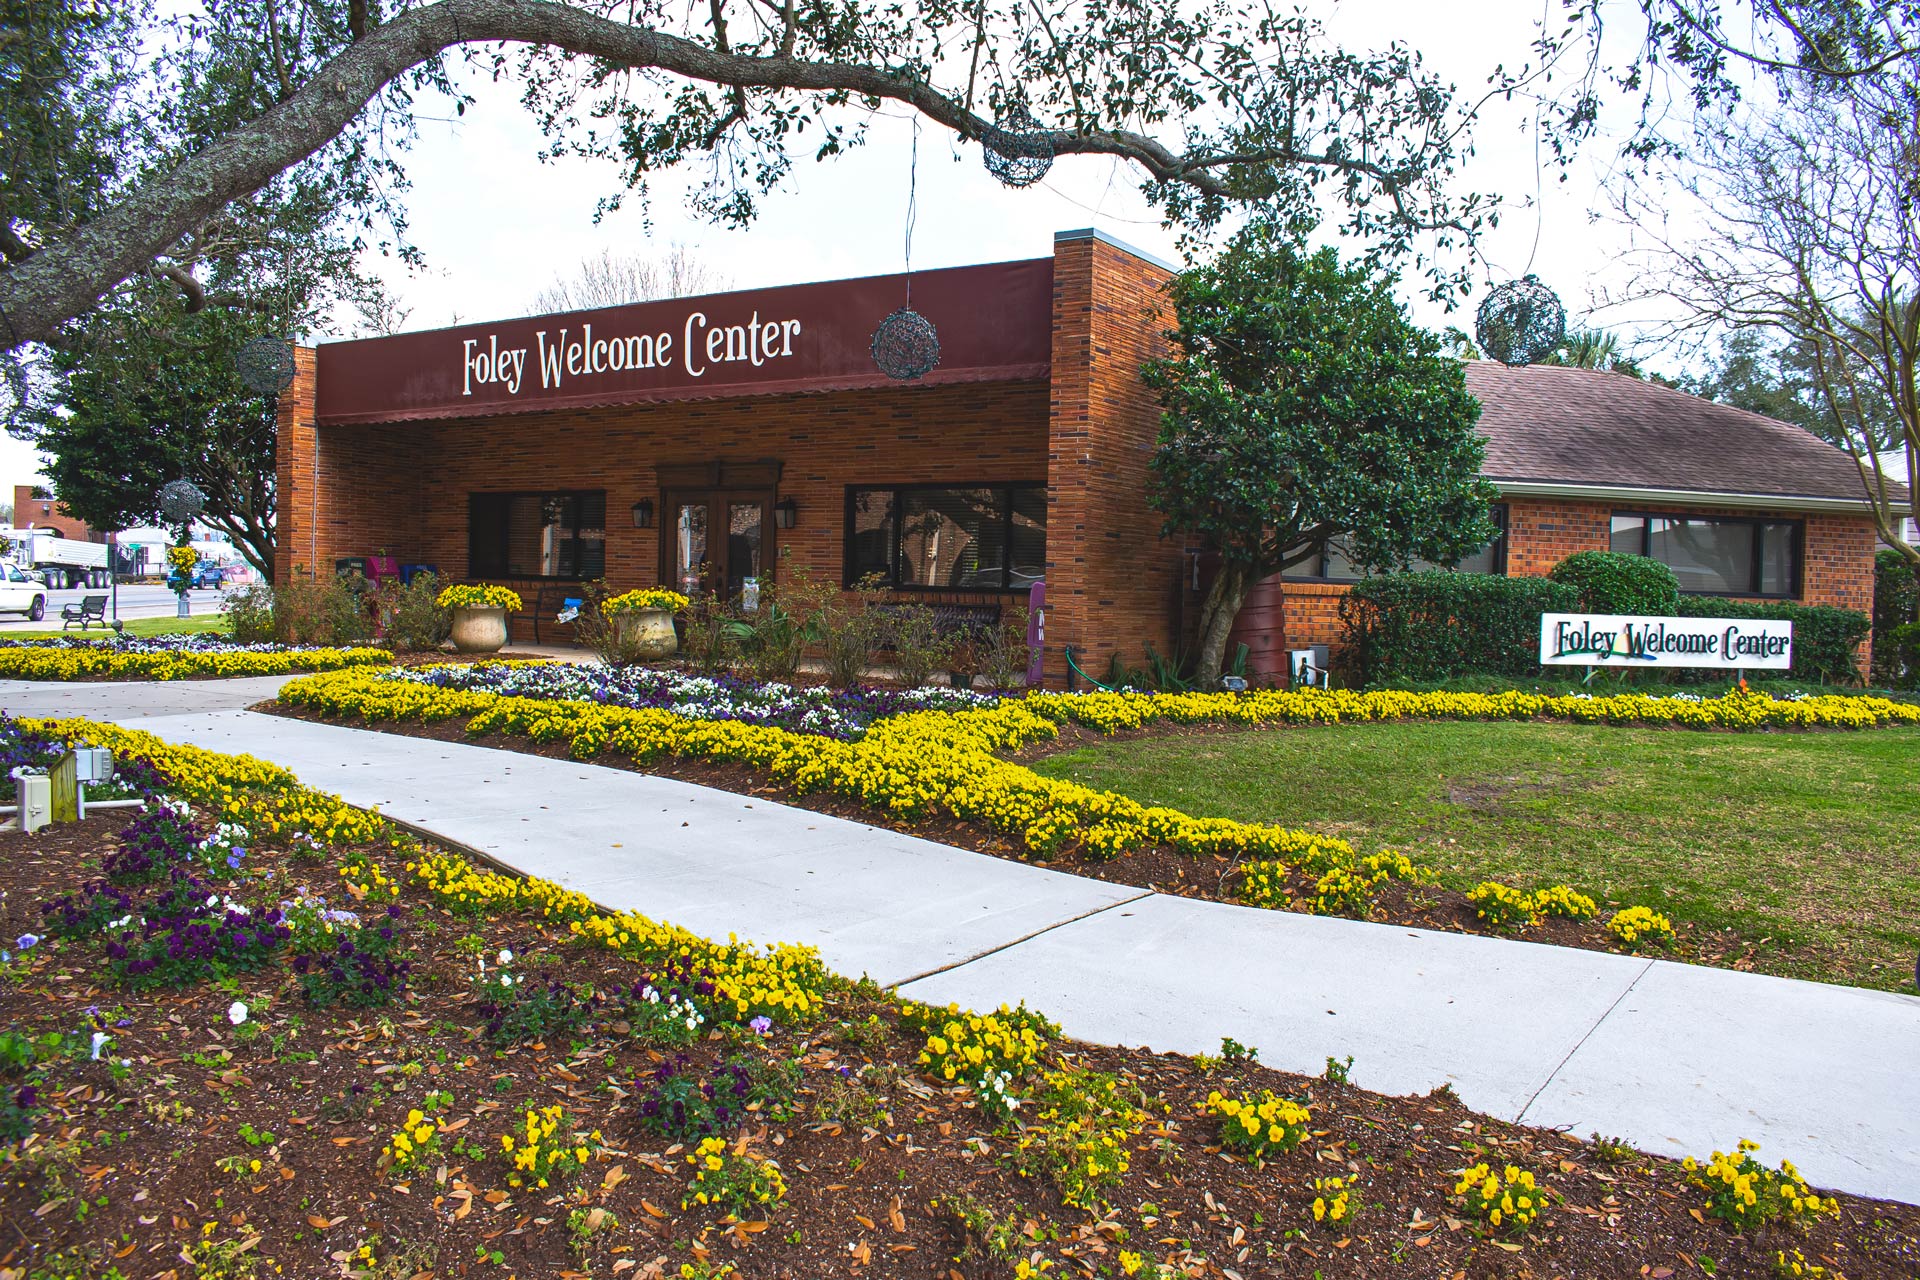 Foley Welcome Center